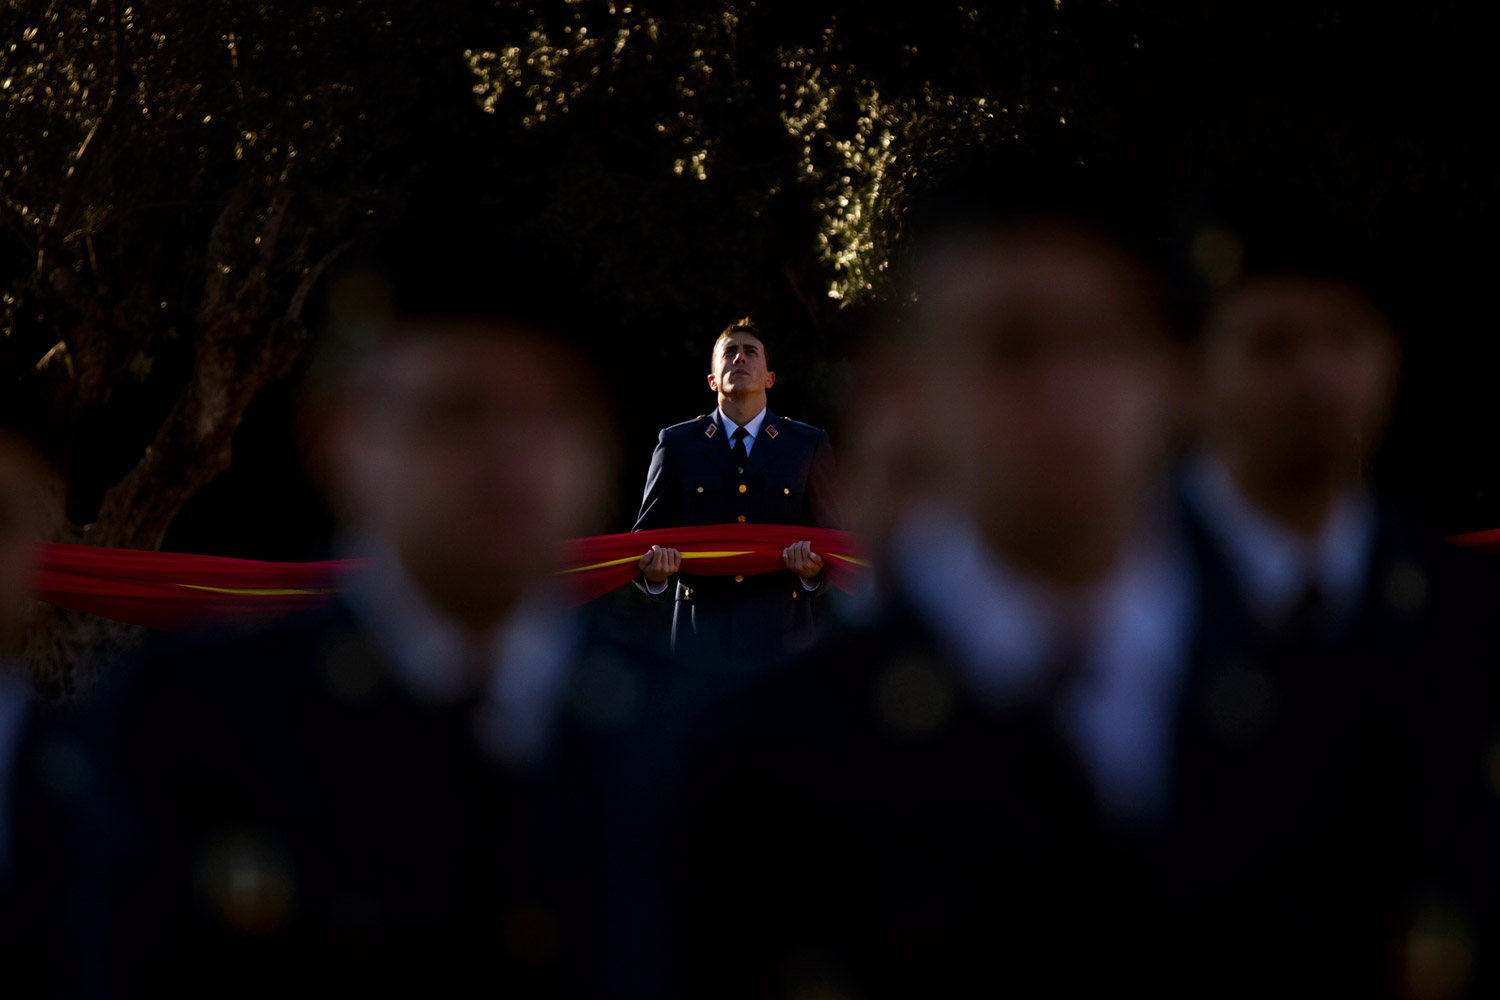 December 6,2011. A Spanish officer participates in the raising ceremony of the Spanish national flag during the celebrations of the 33rd anniversary of the Spanish Constitution, in Madrid.